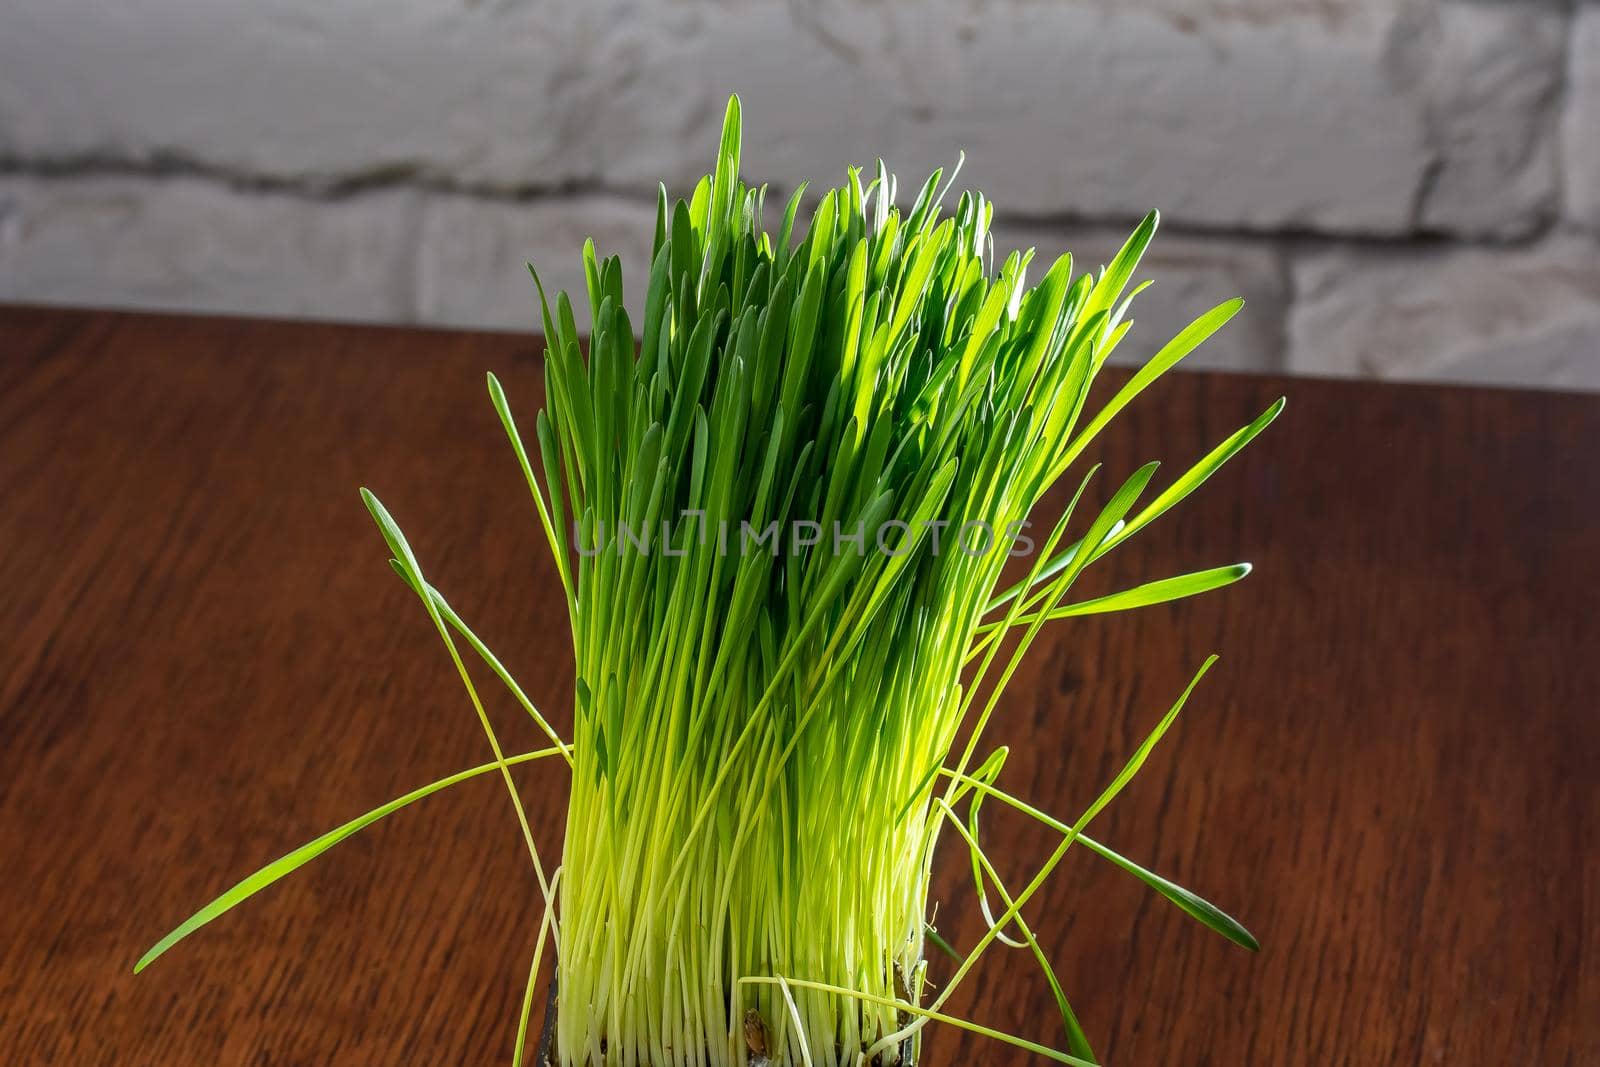 Green cat grass with dew drops grows in a ceramic flower pot in macro. Oat grass plant in terracotta pot. Selective focus on individual blades of grass. Blurred image.